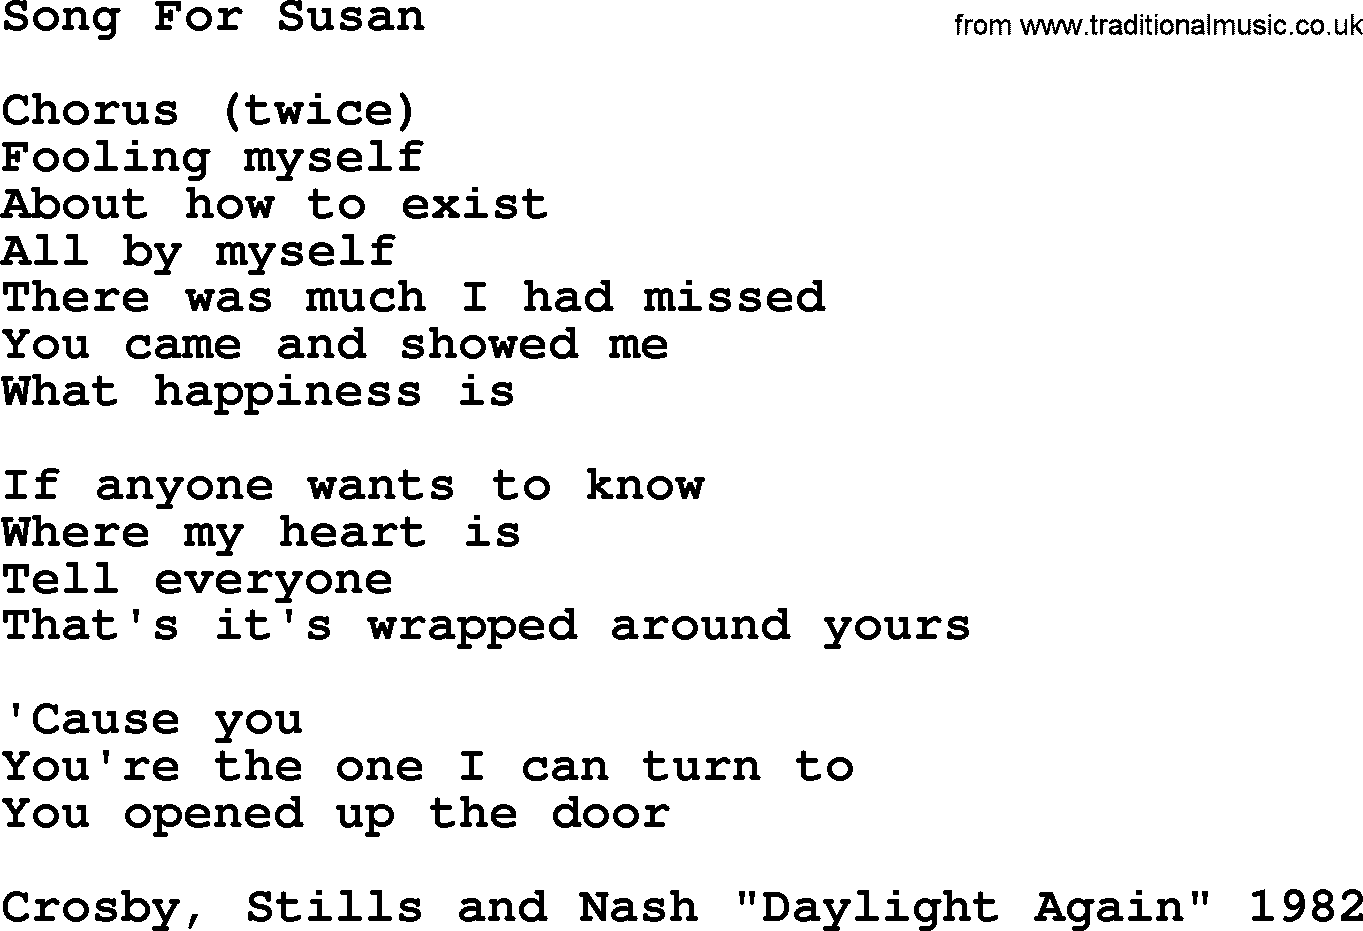 The Byrds song Song For Susan, lyrics